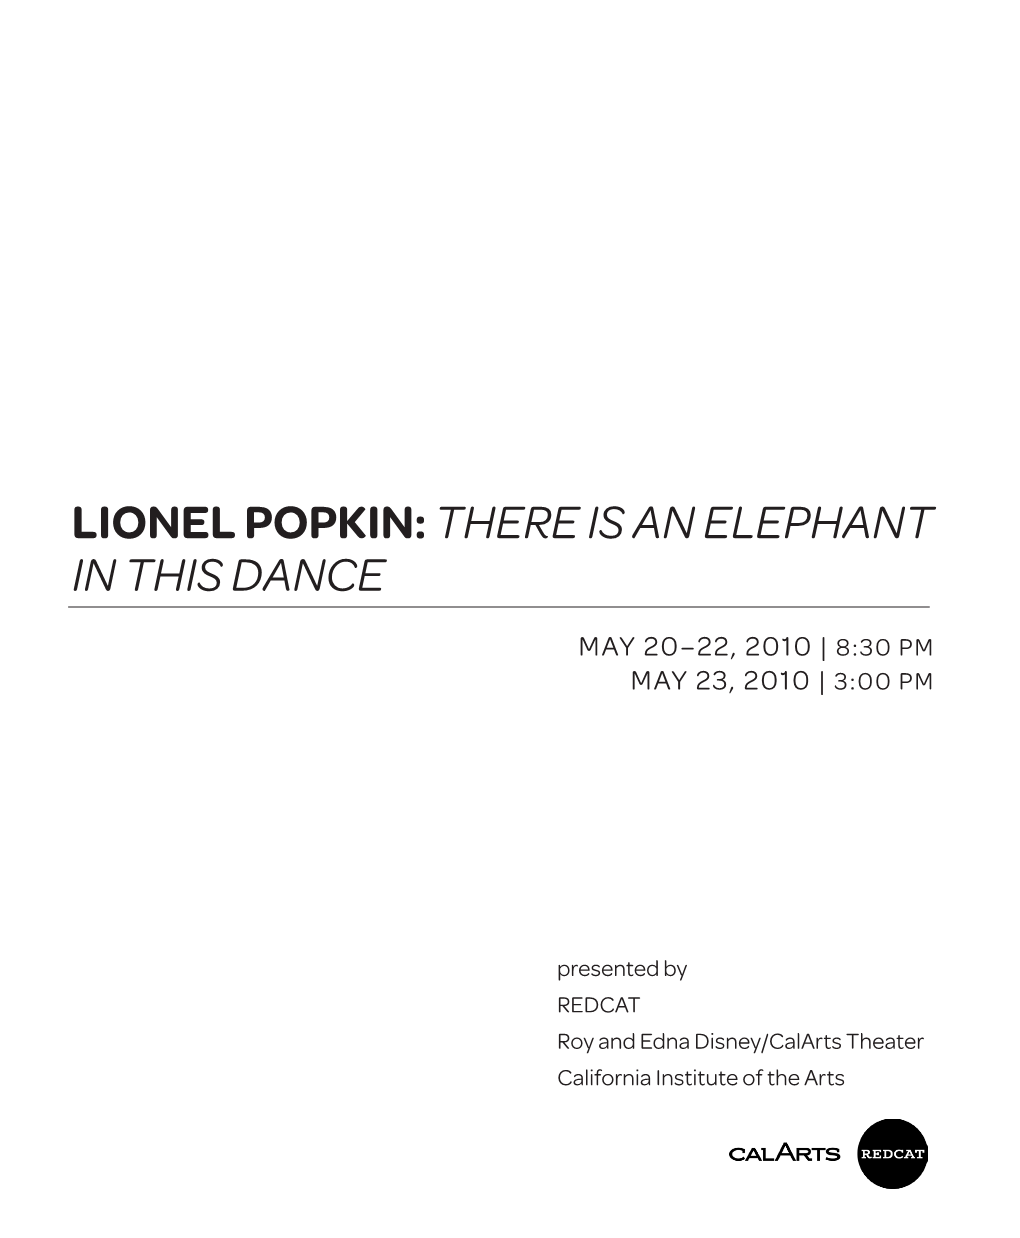 Lionel Popkin: There Is an Elephant in This Dance